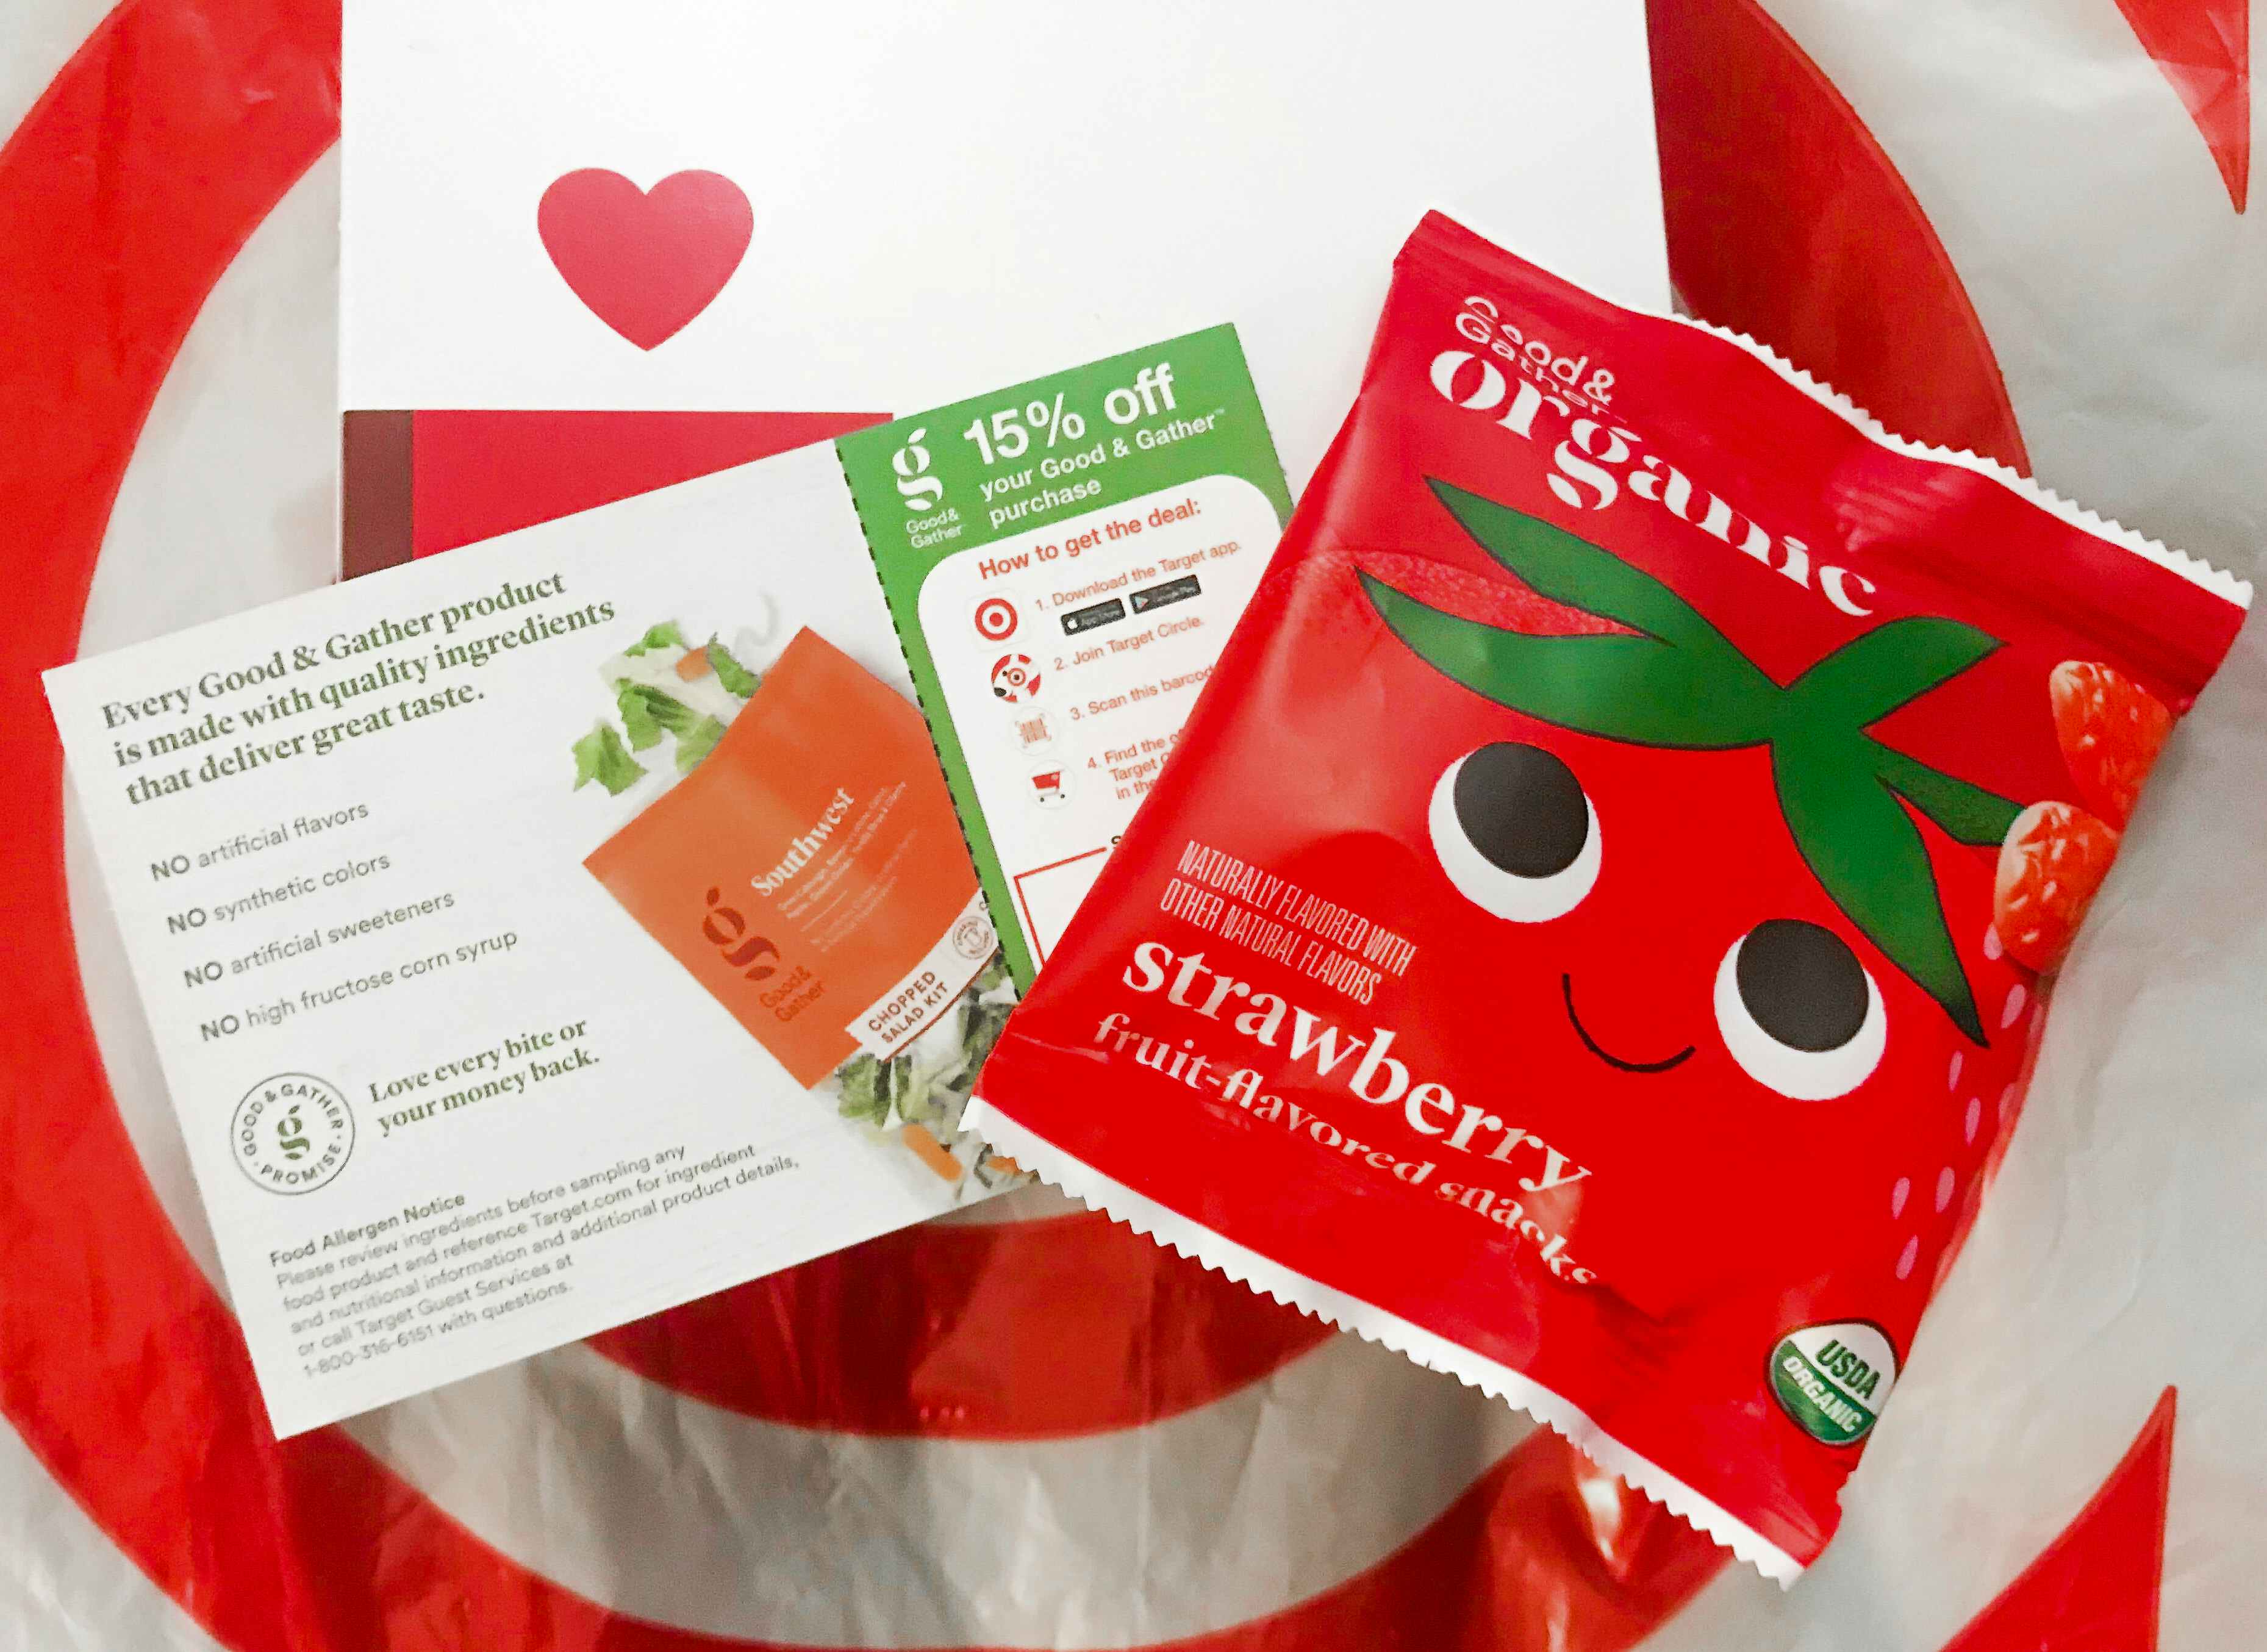 A target good and gather coupon for 15% off next to a free sample of Good & Gather strawberry fruit snacks on top of a Target plastic bag